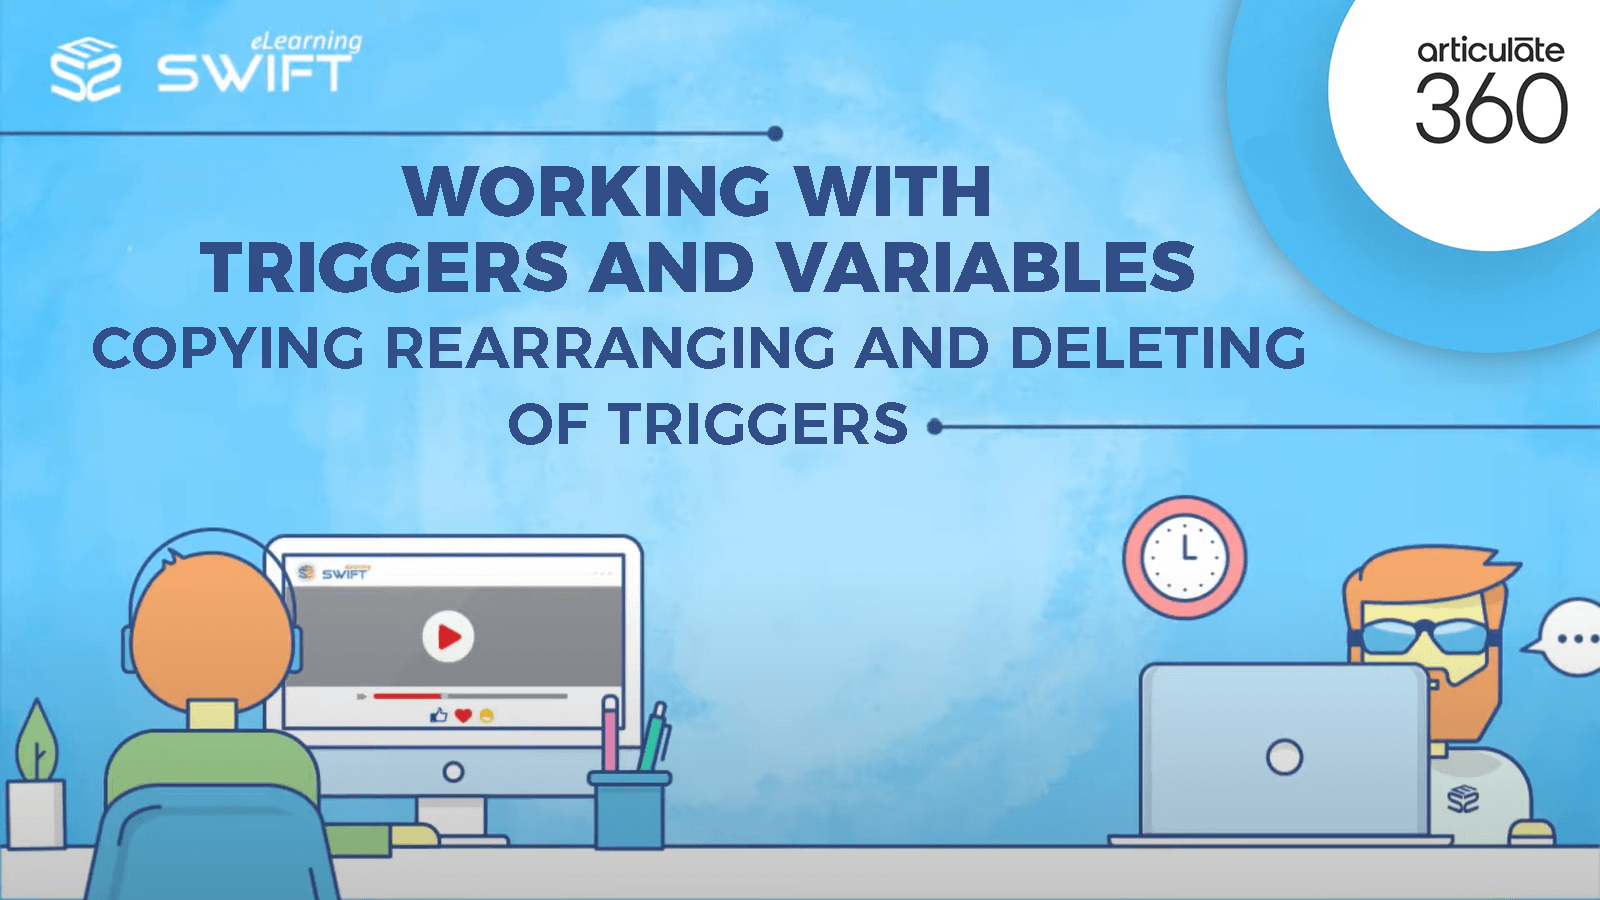 Copying Rearranging and Deleting of Triggers